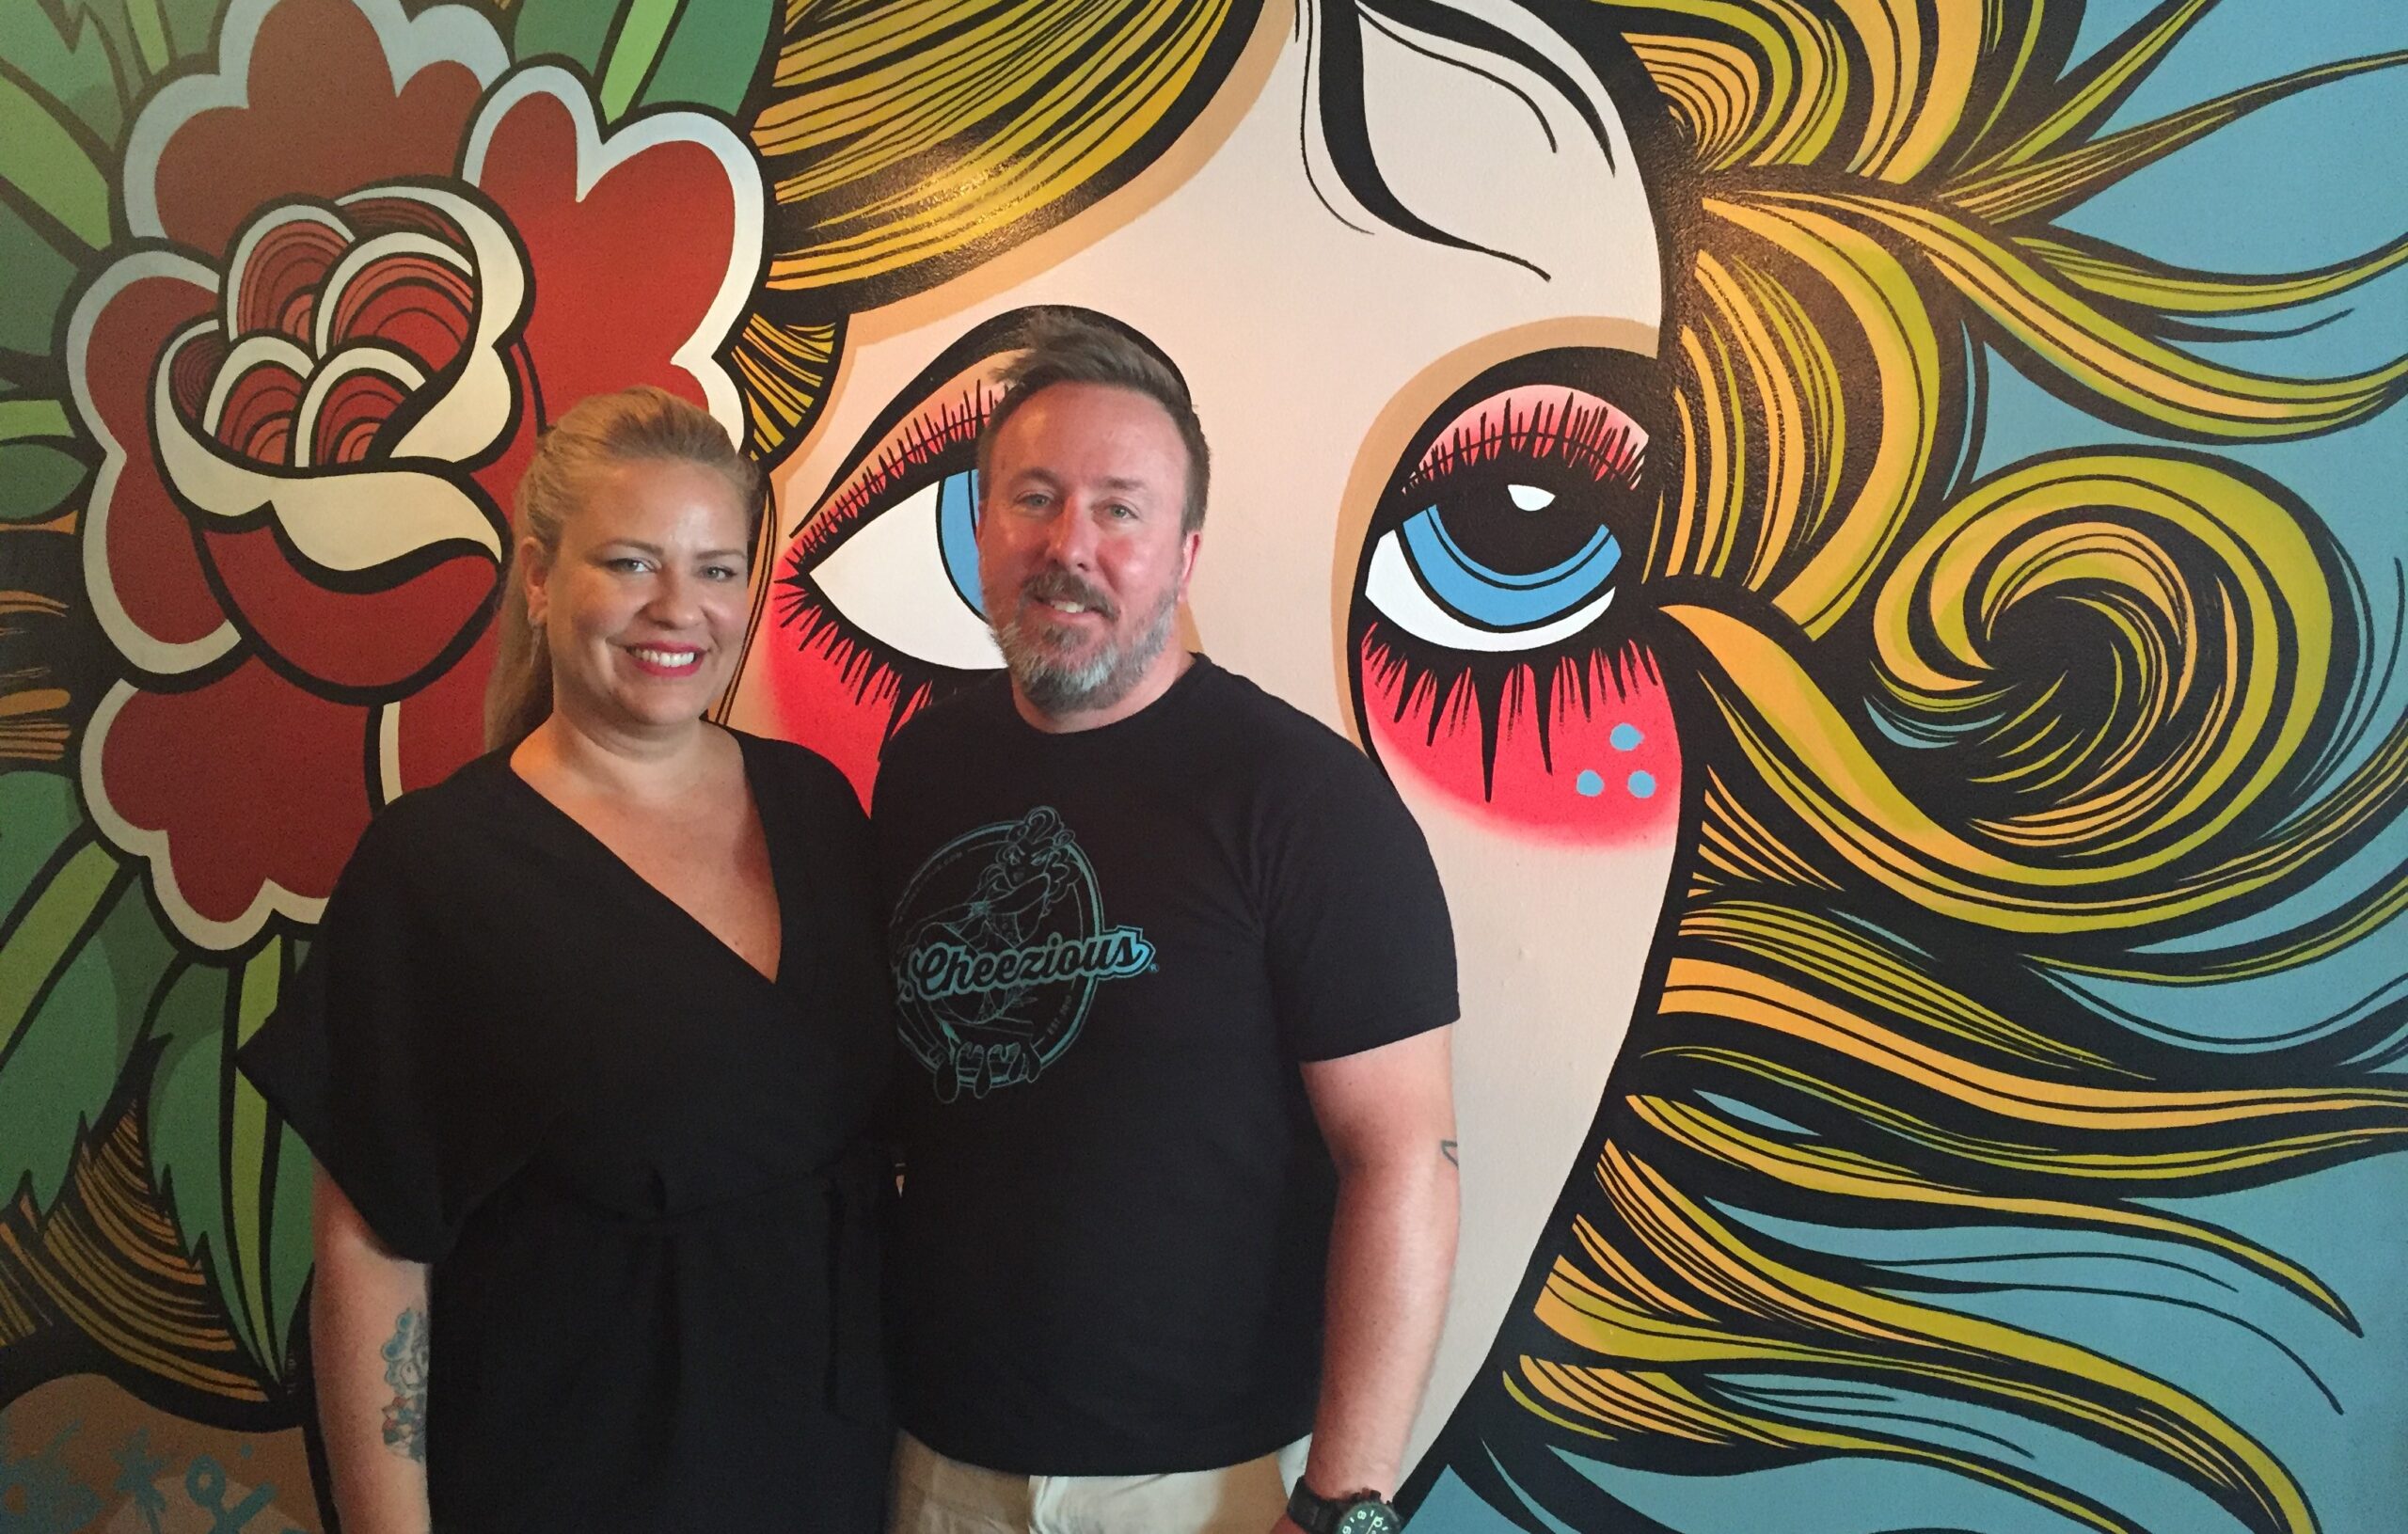 Ms Cheezious owners Brian and Fatima Mullins at the Coral Gables Location